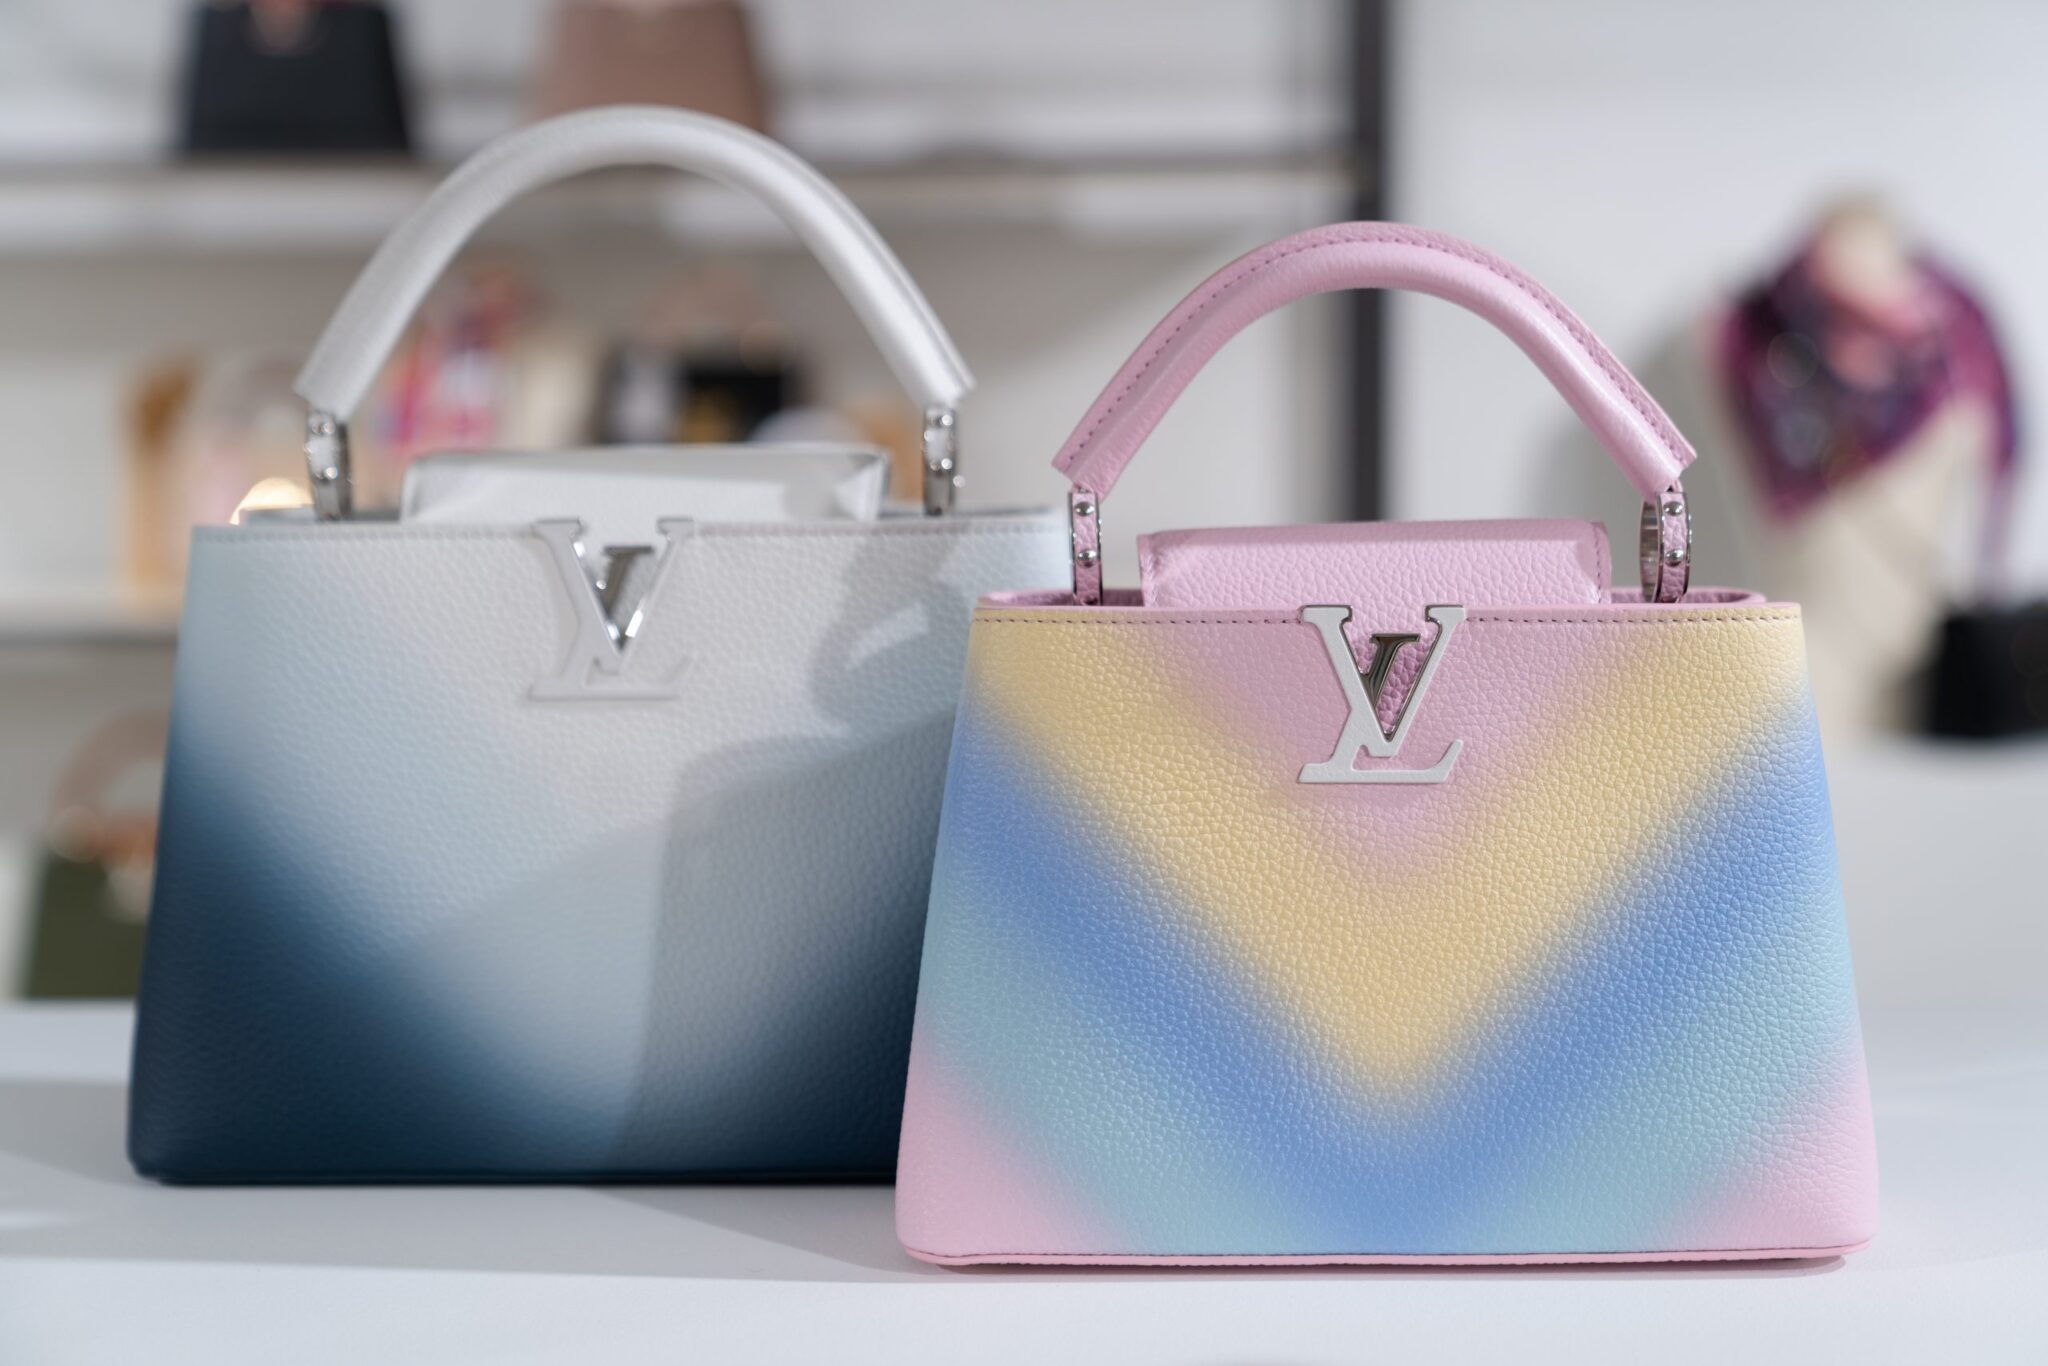 Louis Vuitton - For the 2018 Cruise Collection, Louis Vuitton updates the  emblematic Capucines bag to tell new stories. Discover more at http:// vuitton.lv/2ha0FOo